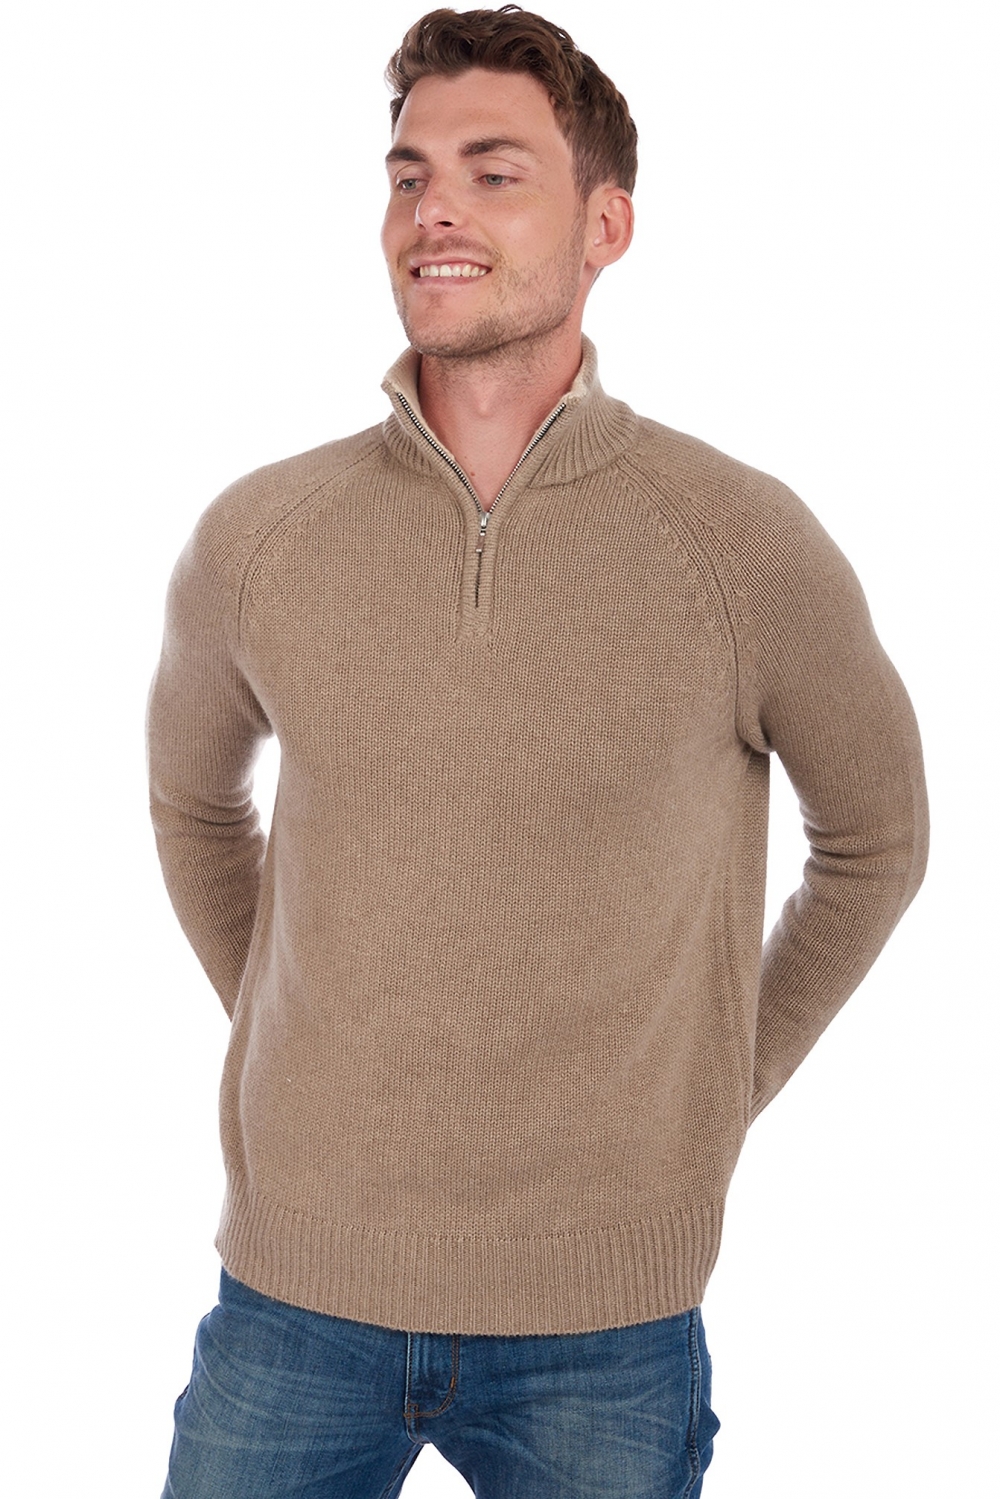 Cachemire polo camionneur homme angers natural brown natural beige 4xl